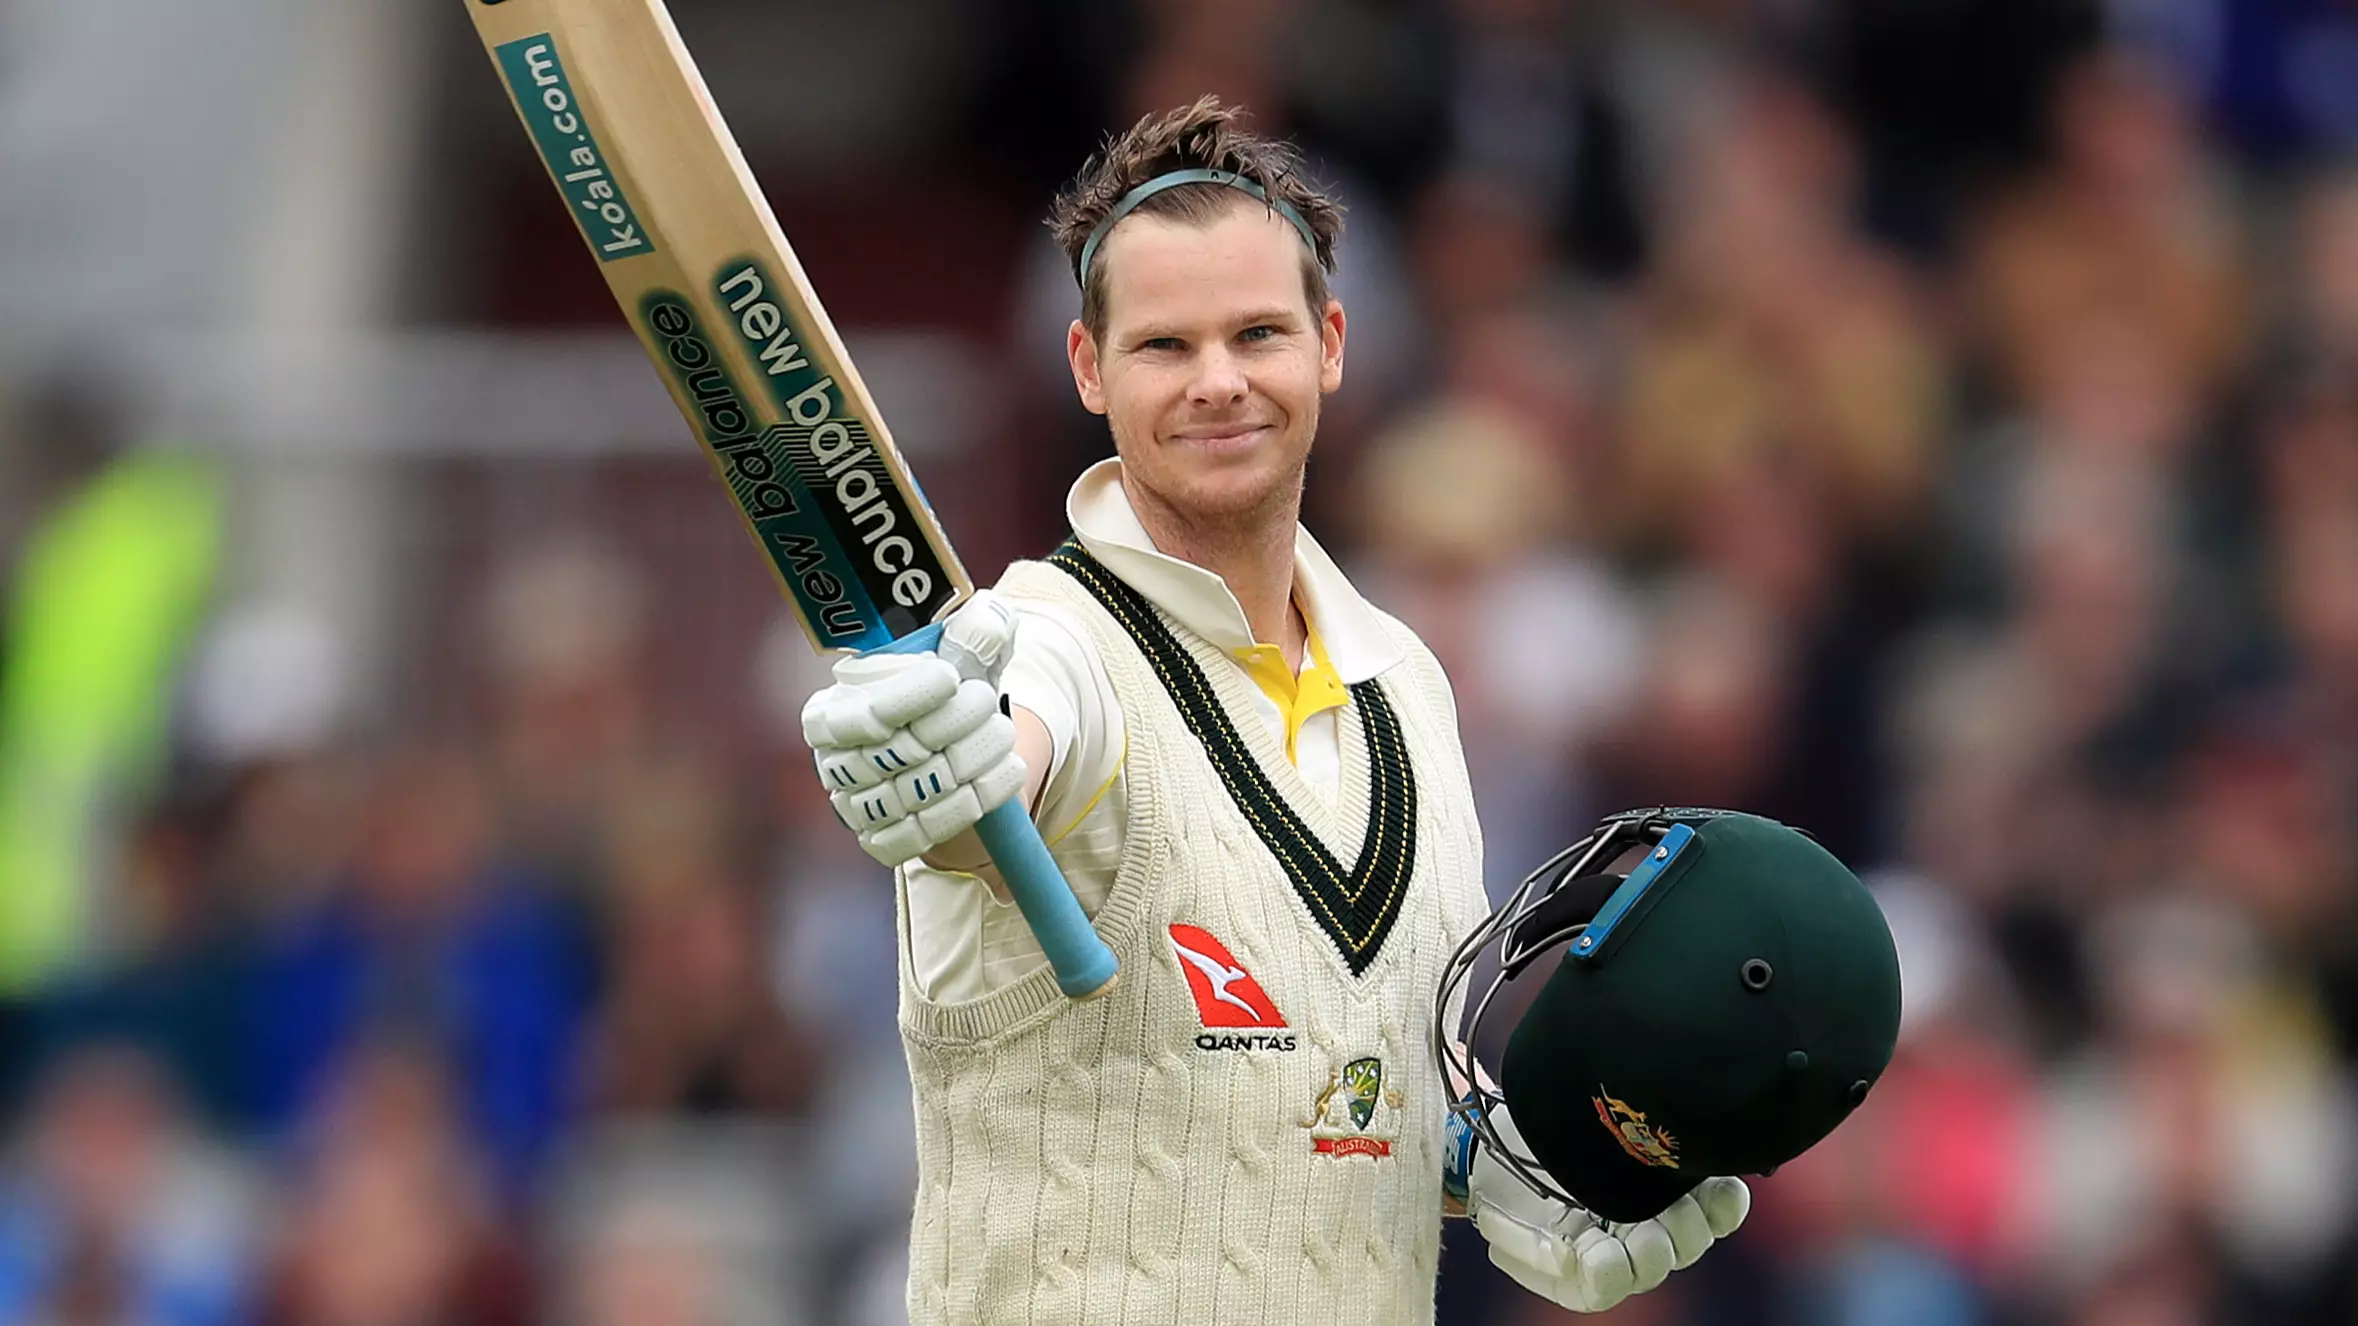 ‘Batsmen’ Officially Renamed ‘Batters’ As Cricket Moves To Become More Gender Neutral